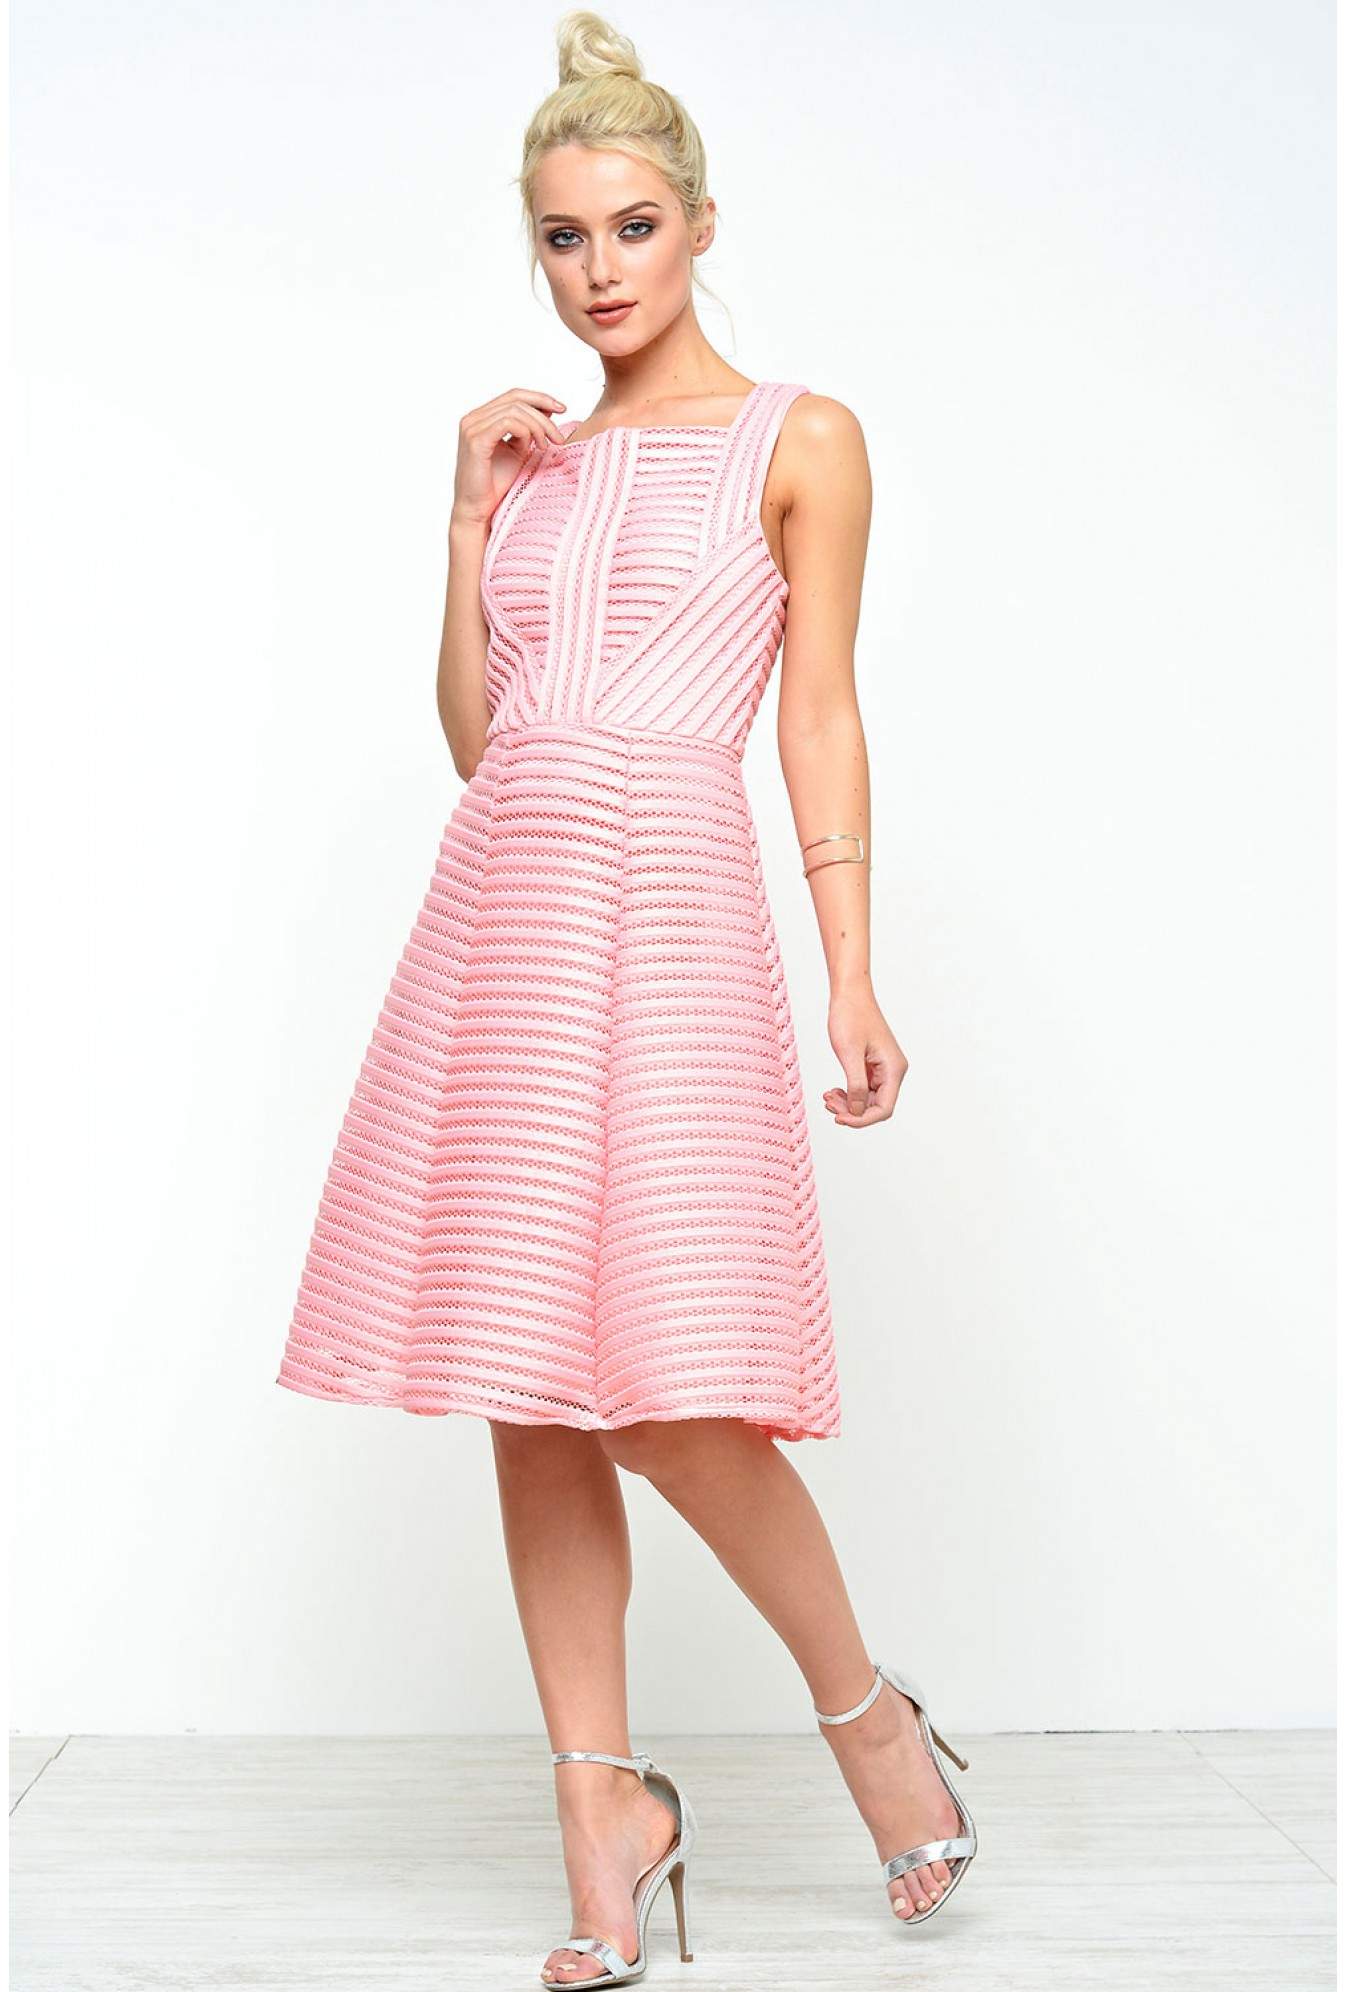 salmon pink dress what colour shoes